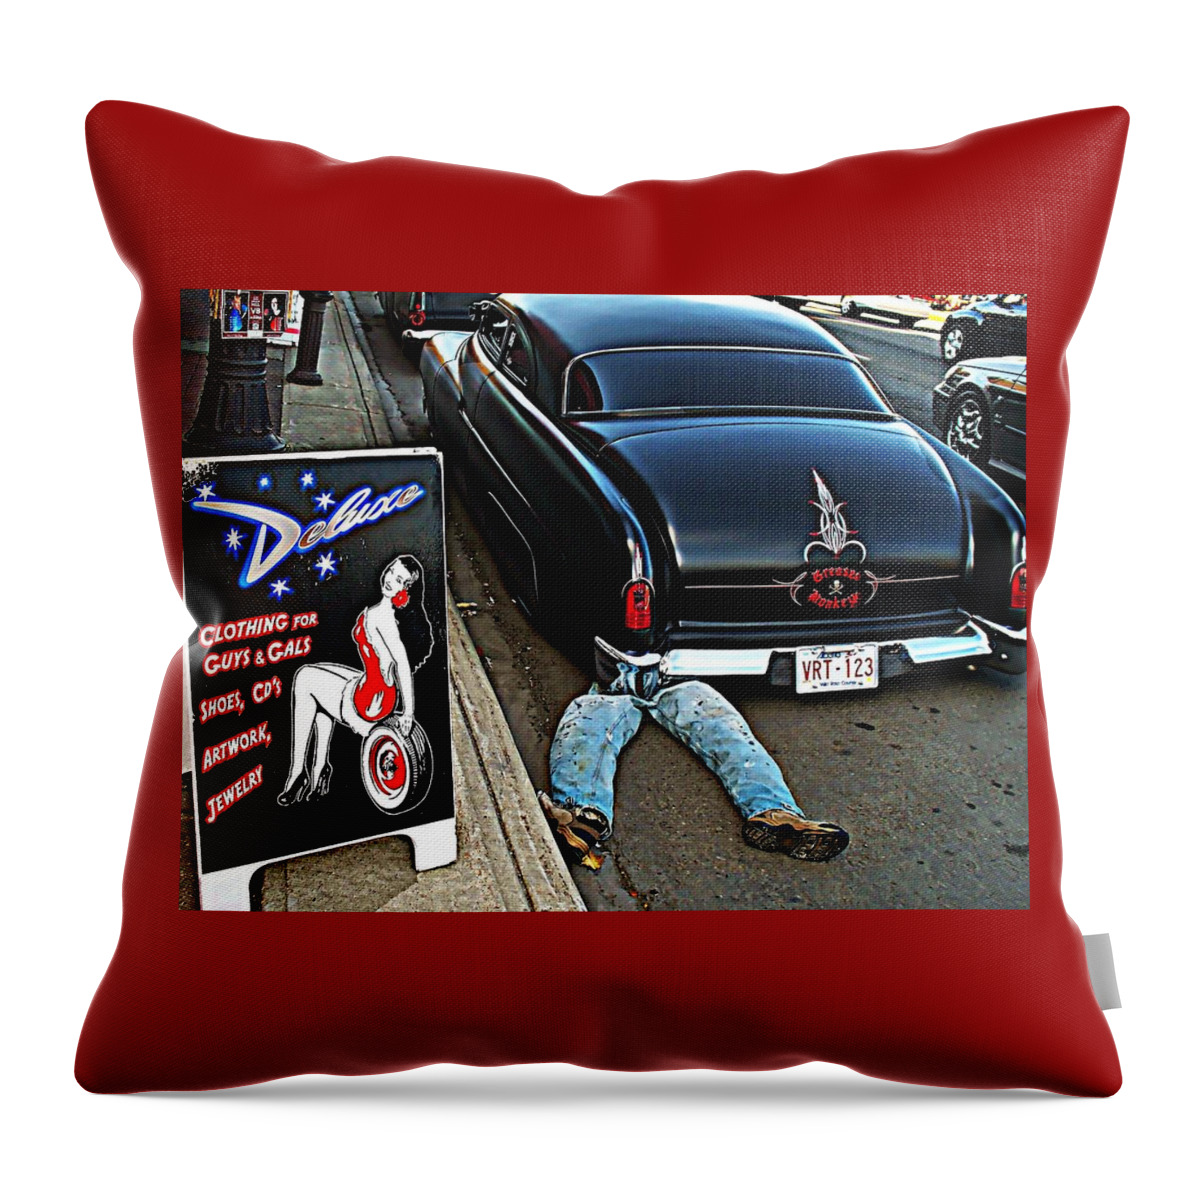 Fringe Throw Pillow featuring the photograph He Done Her Wrong by William Rockwell